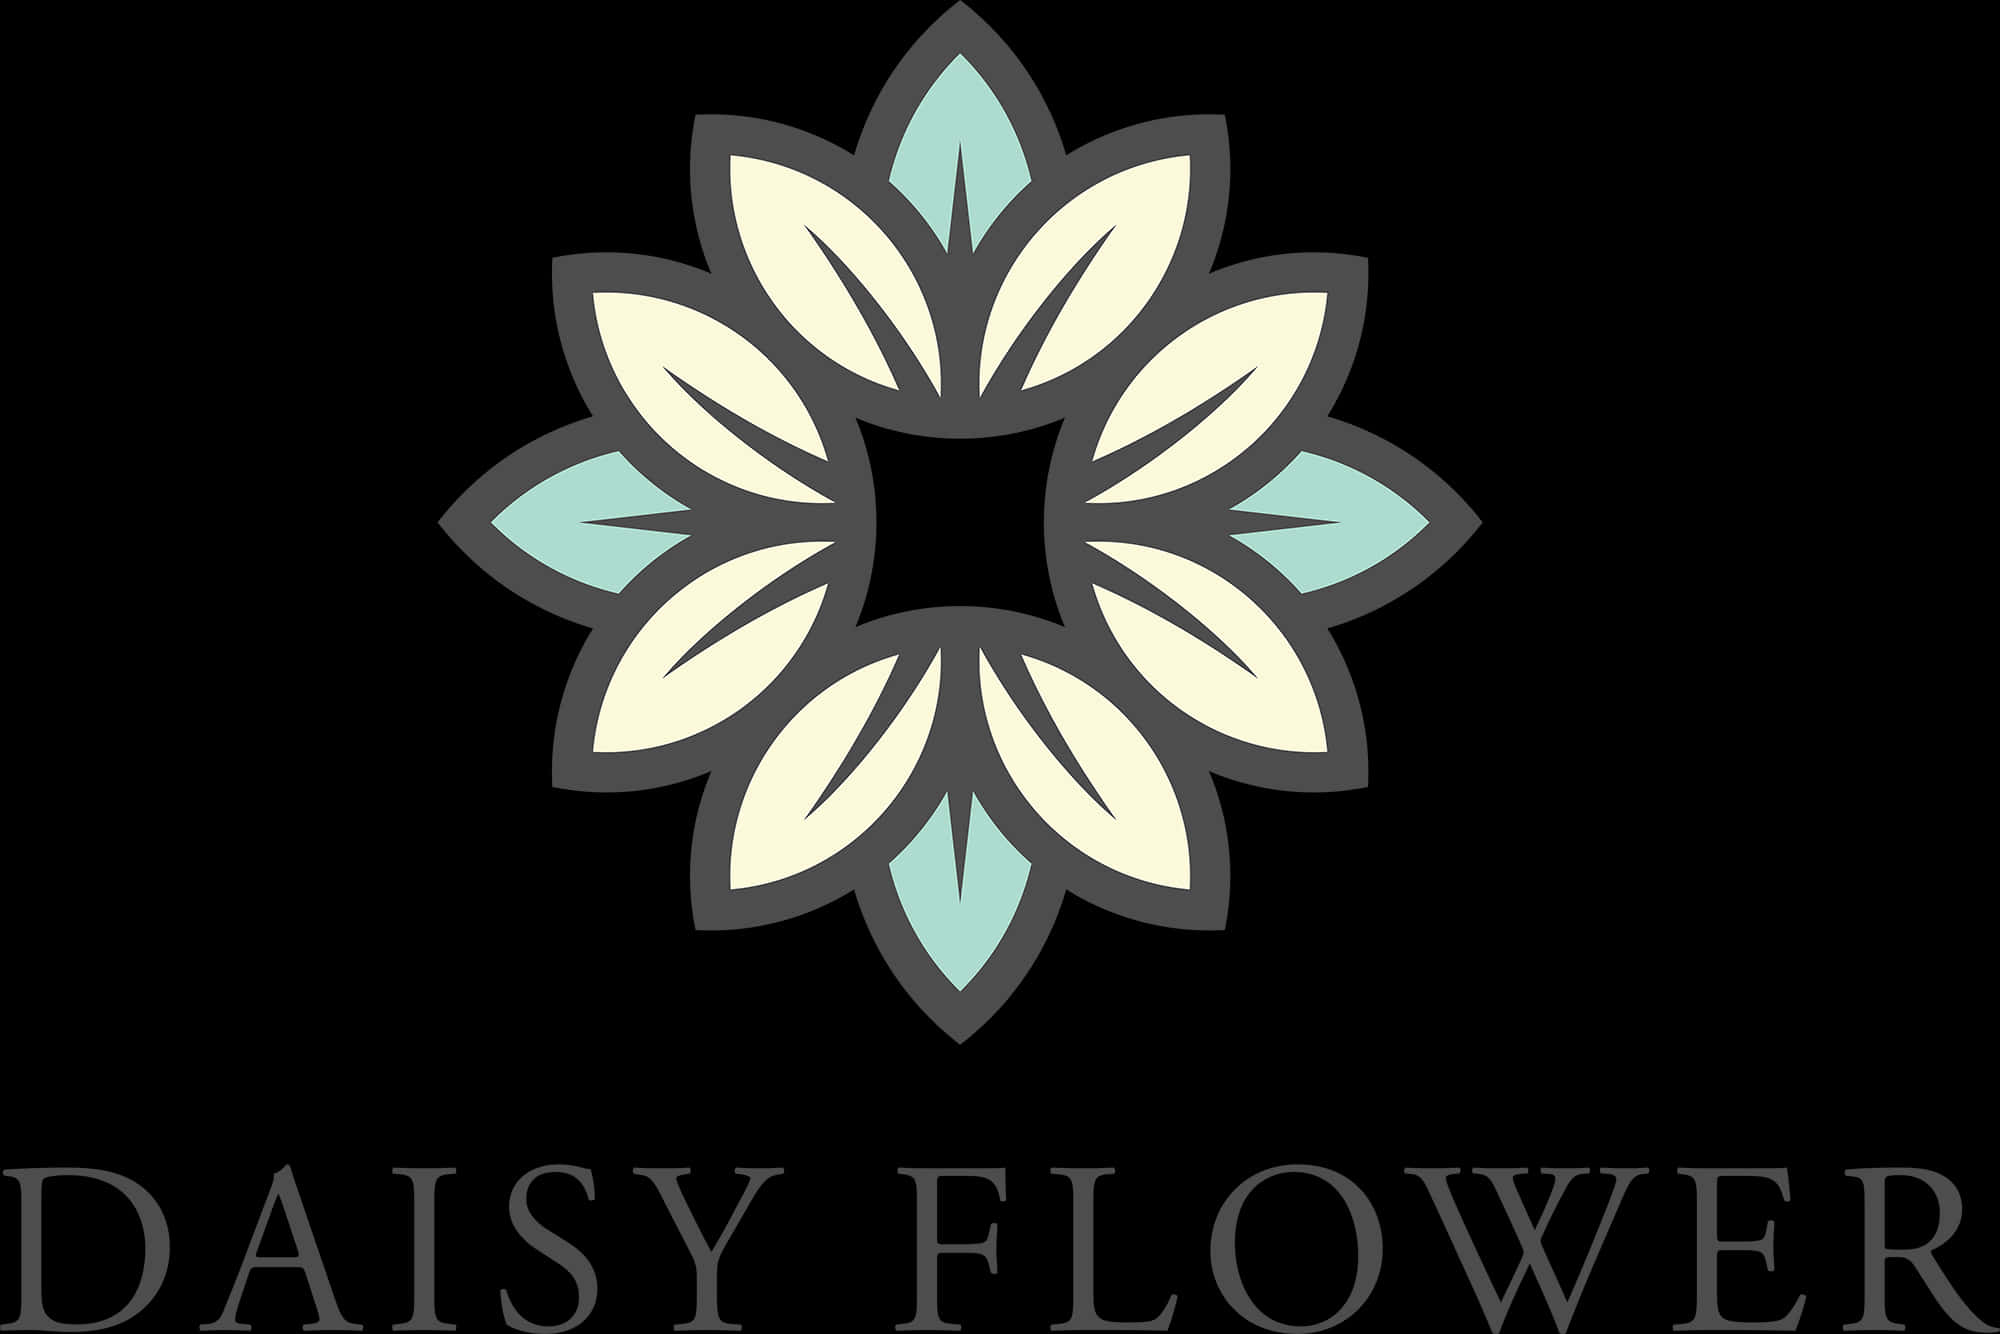 Stylized Daisy Flower Graphic PNG image